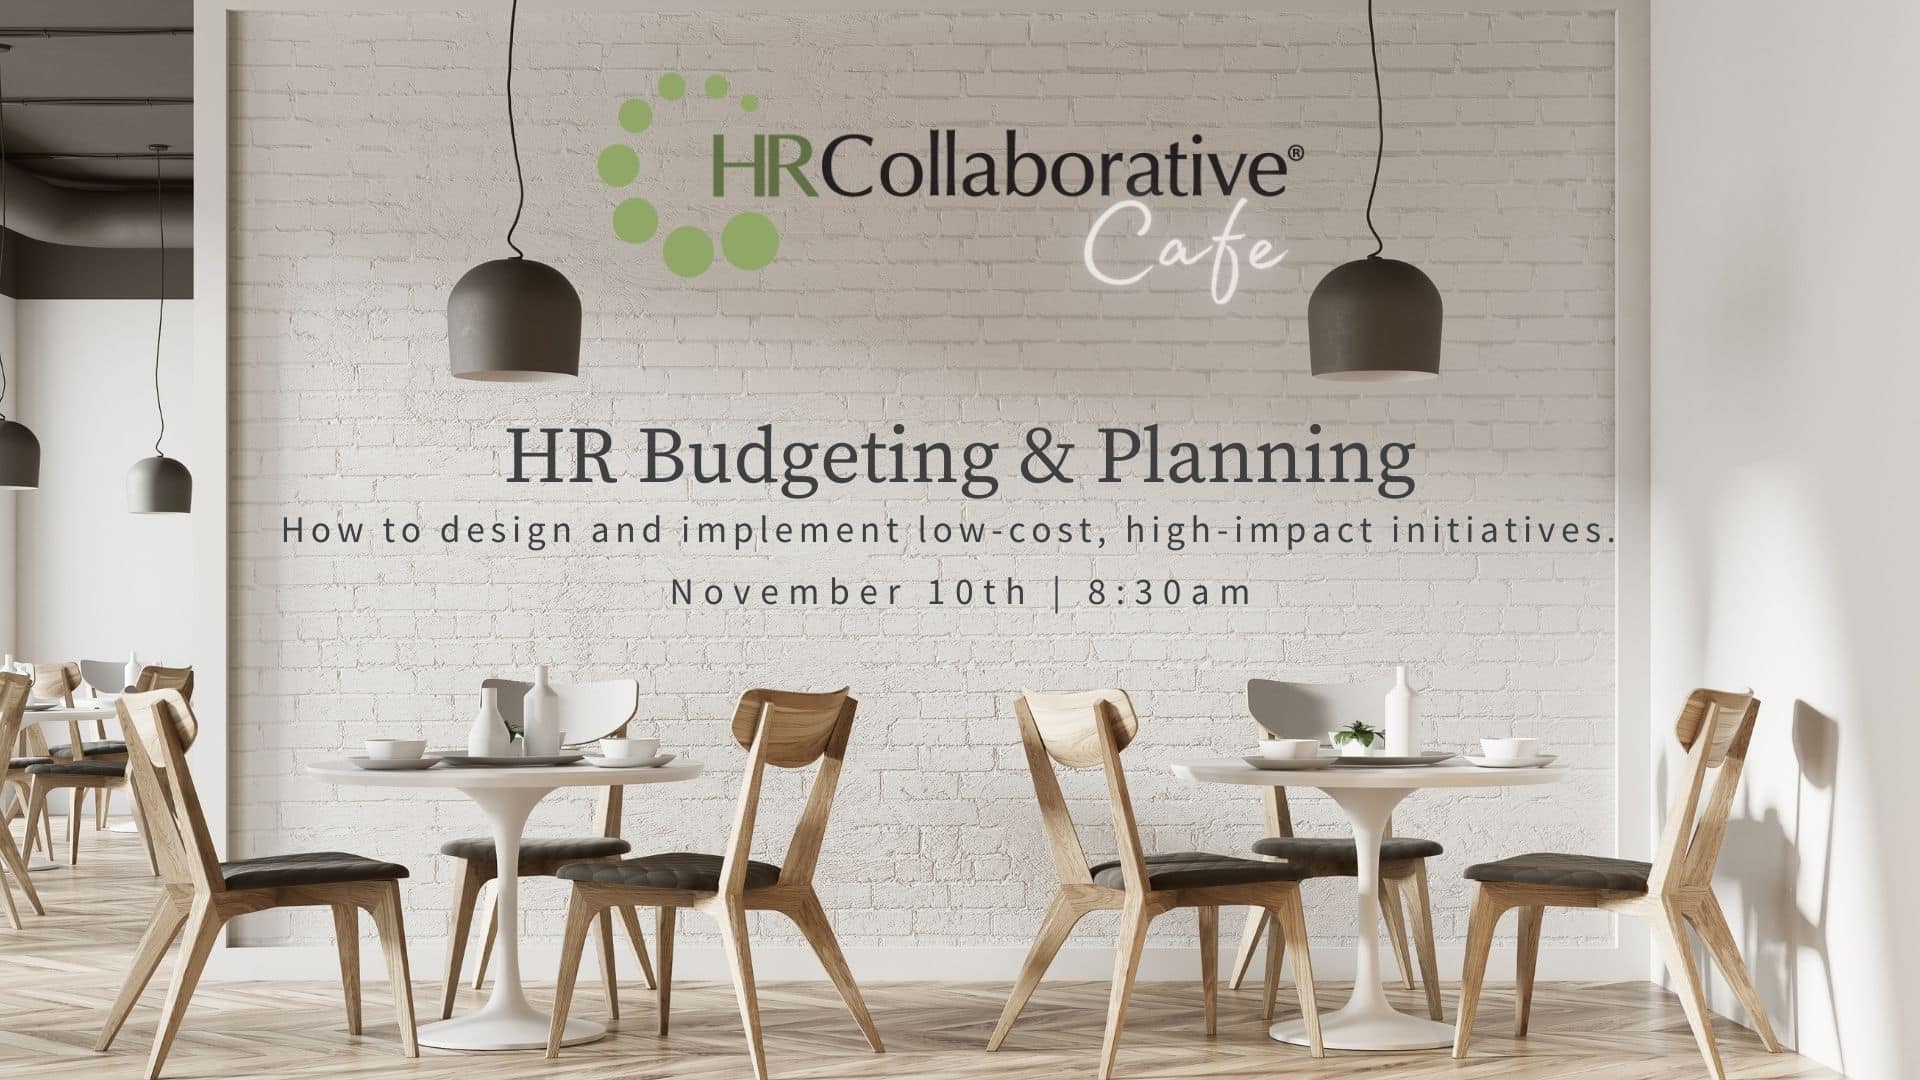 Collaborative-Cafe-HR-Budgeting